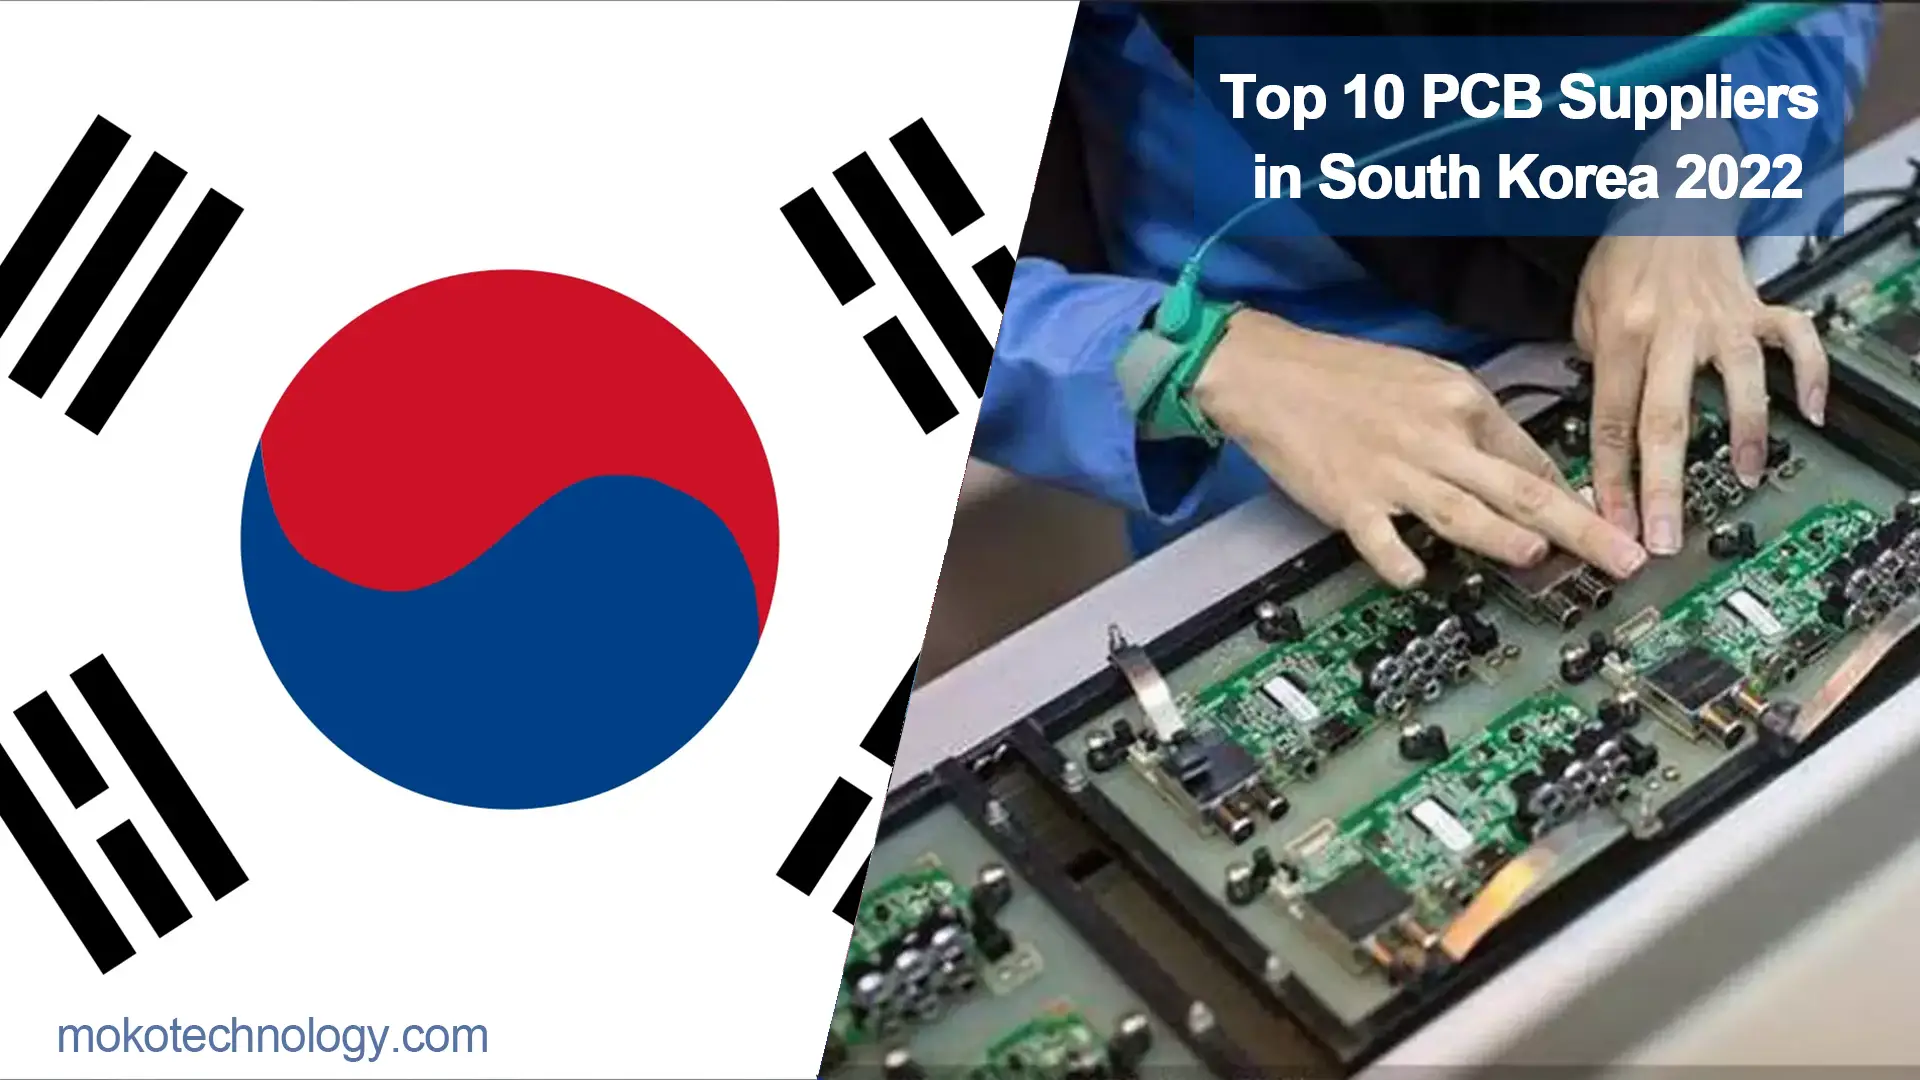 Topp 10 PCB Suppliers in South Korea 2022